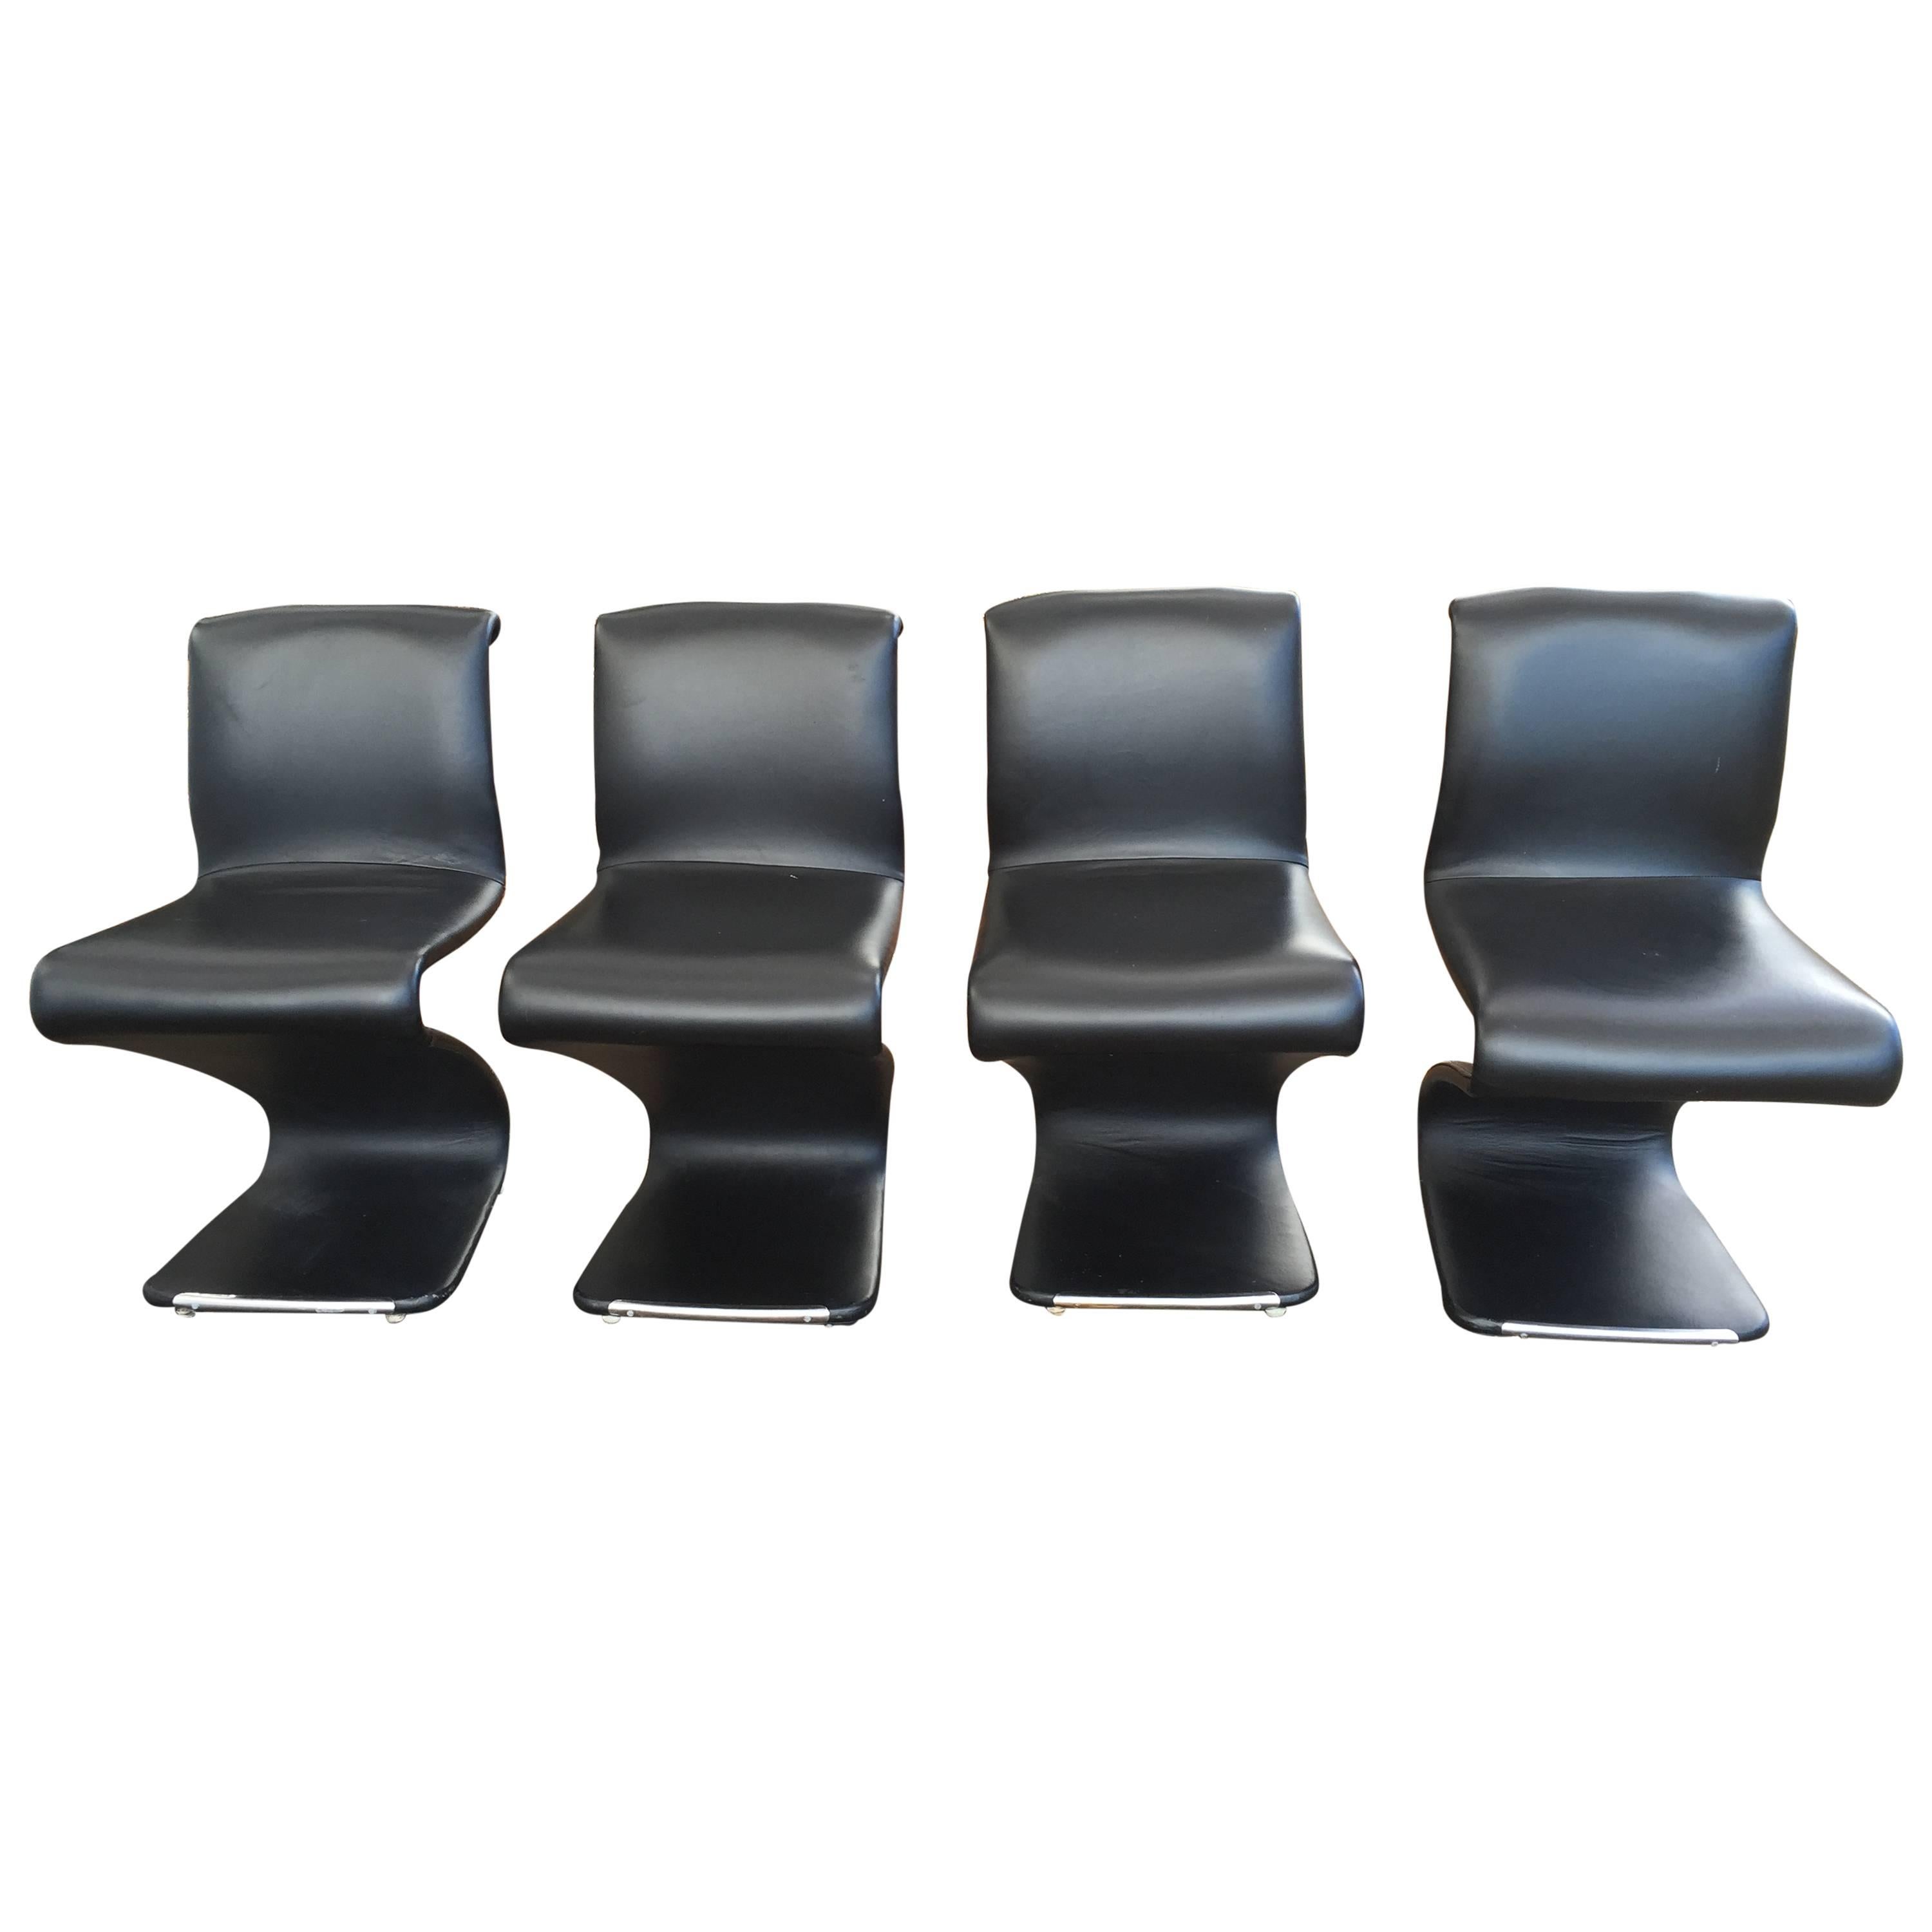 Set of Four Z Chairs For Sale